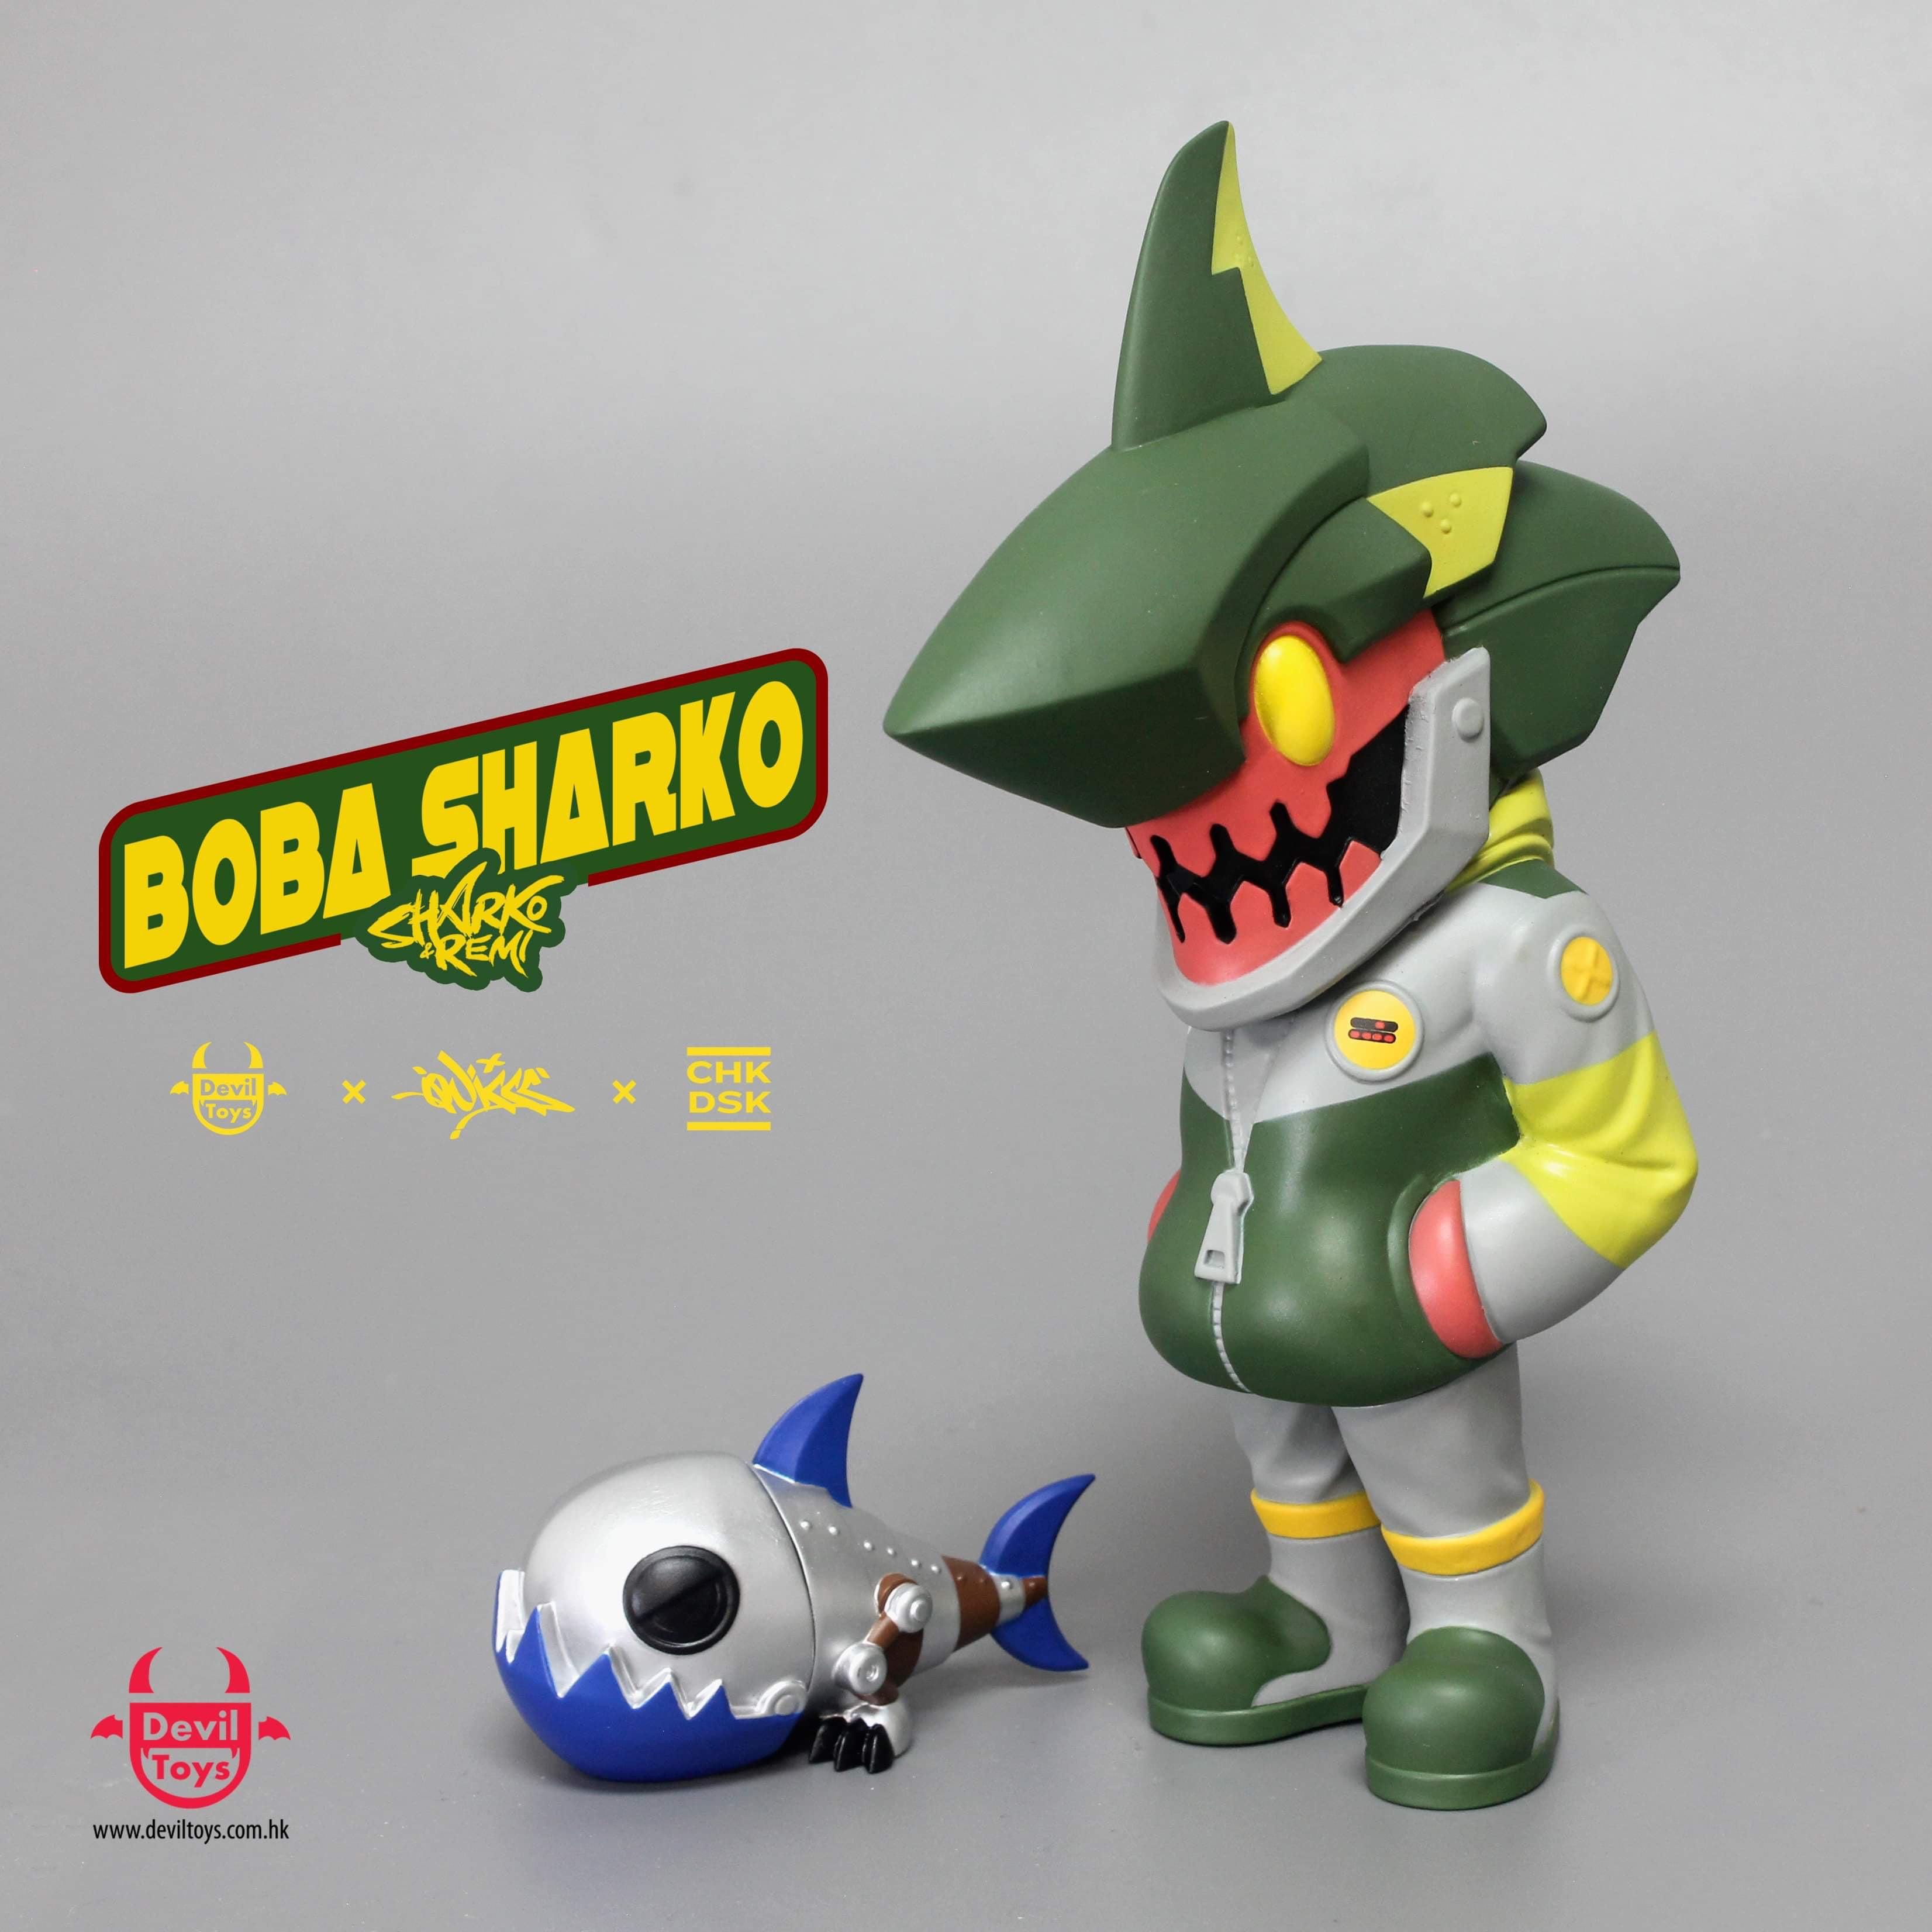 Toy figures of Boba Sharko & Remi by Quiccs x CHK DSK x Devil Toys with a toy fish and logo.